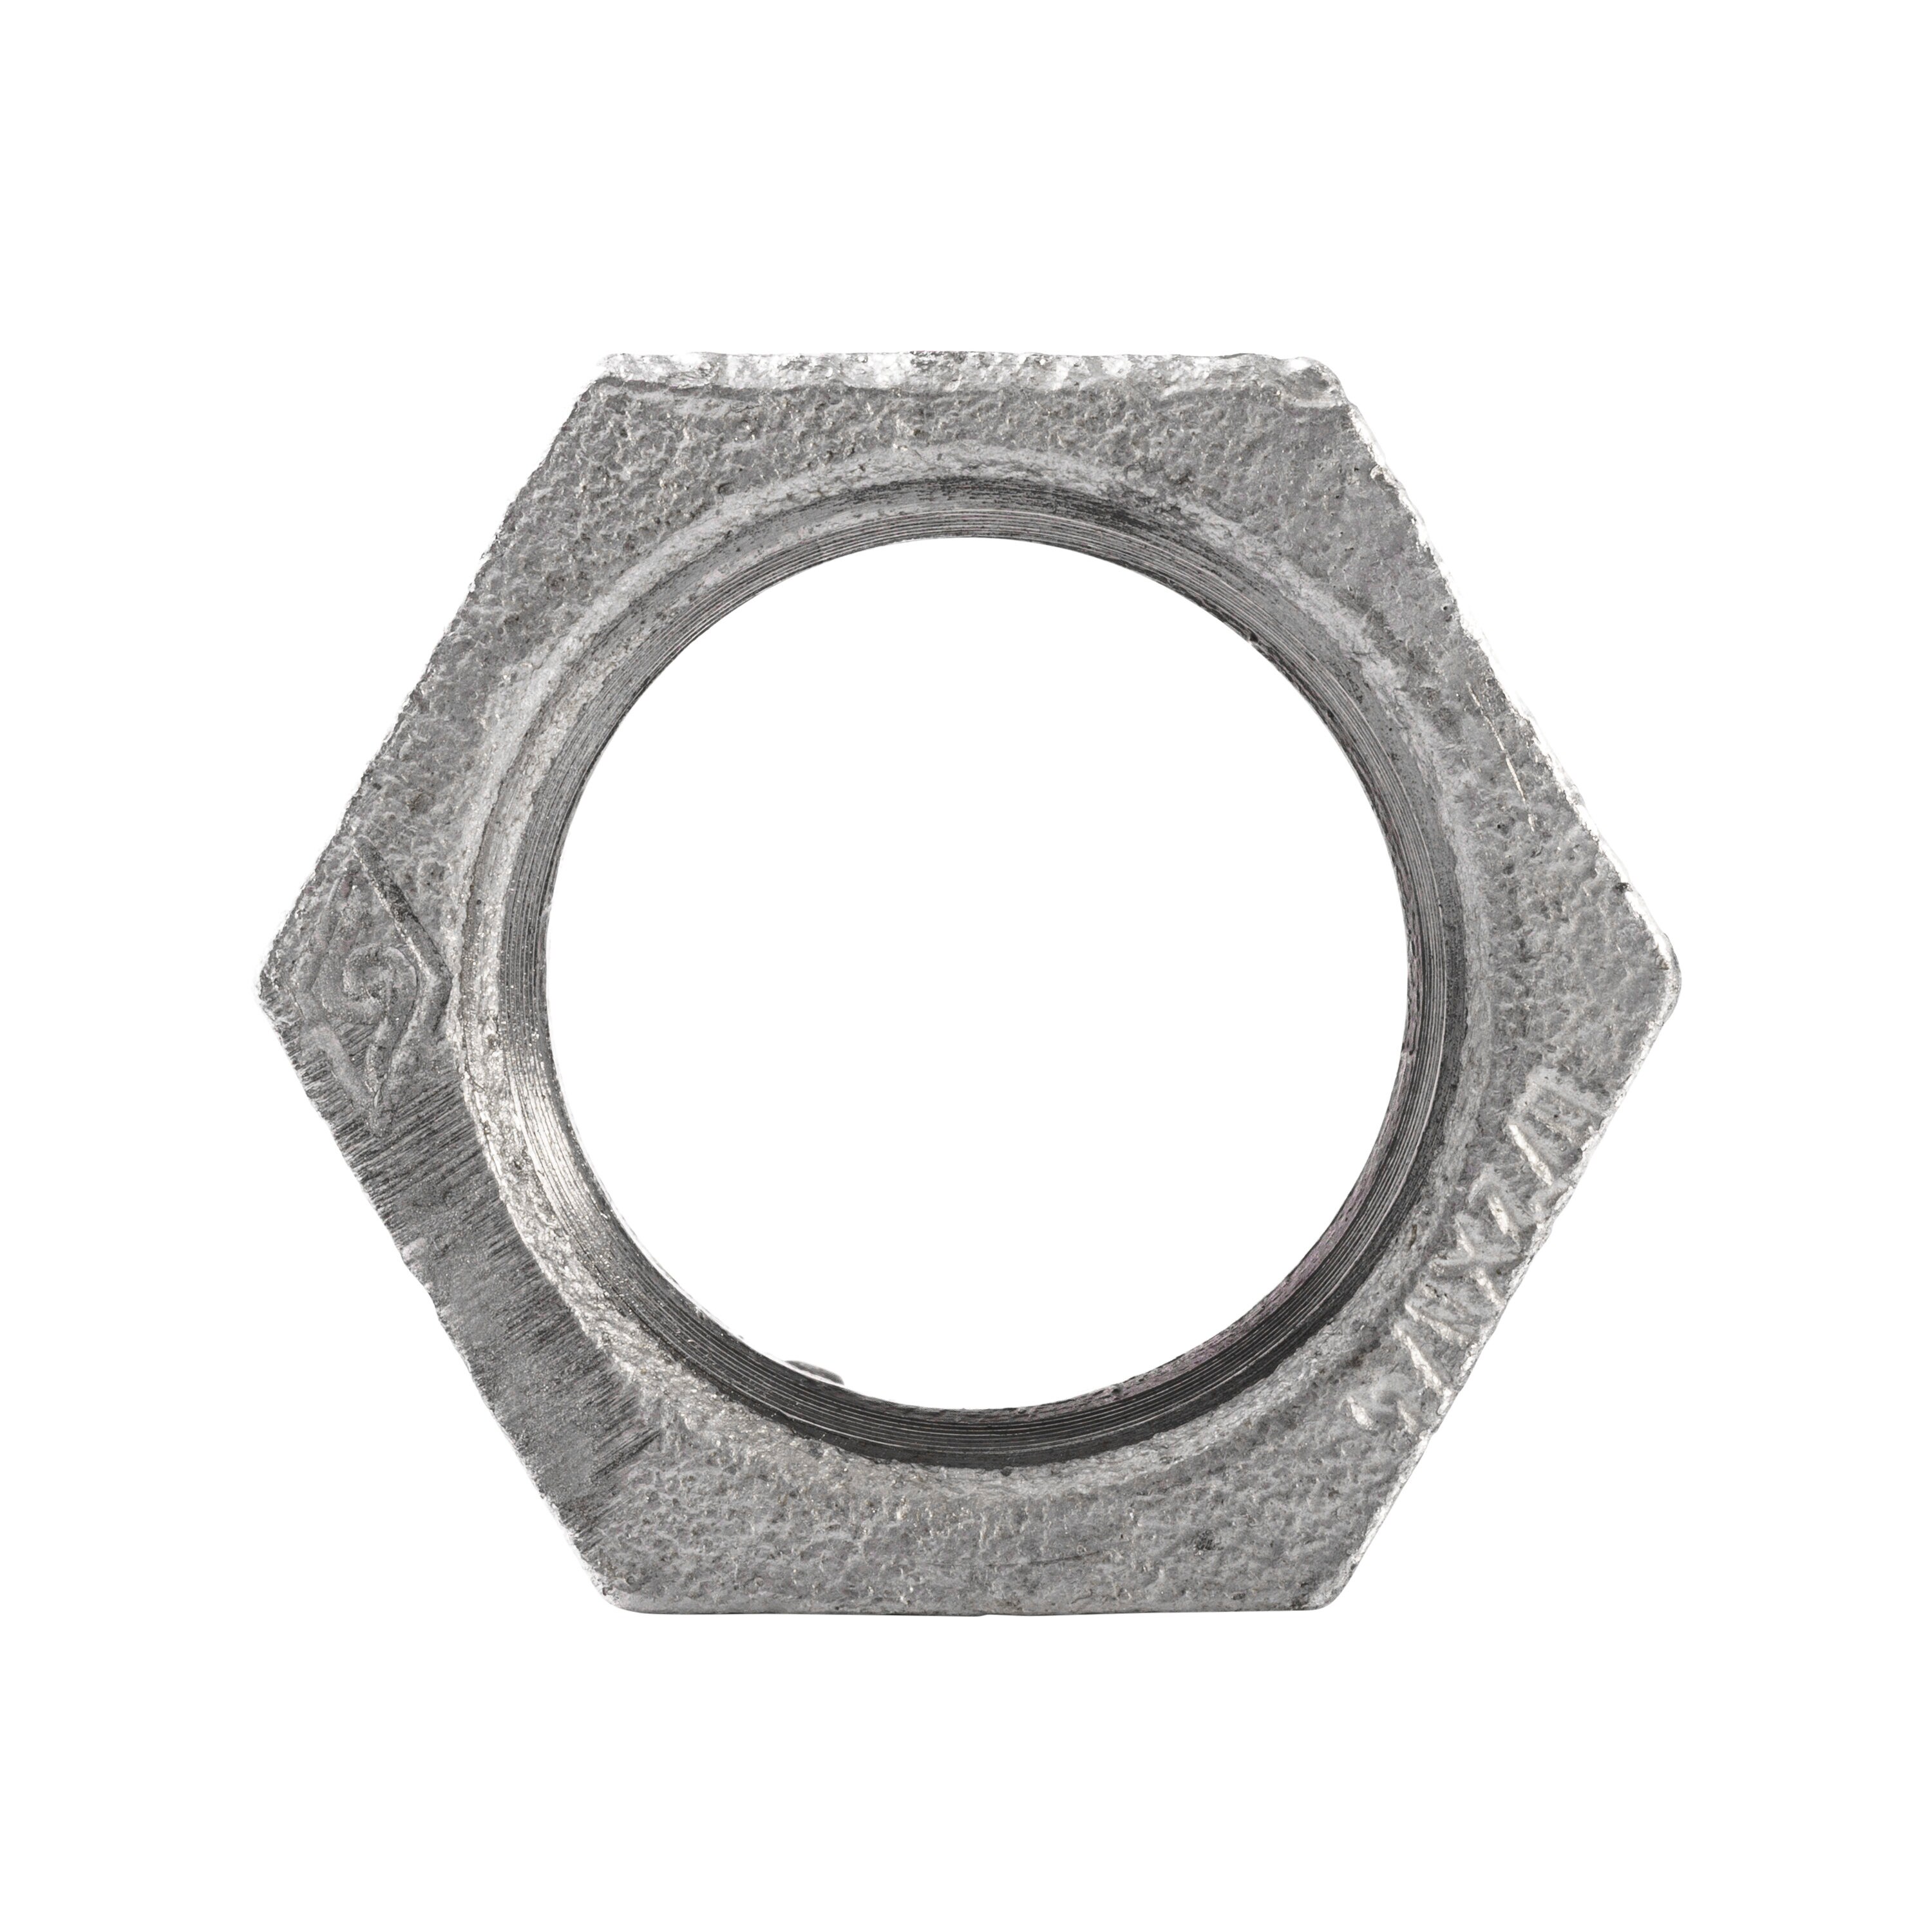 RELIABILT 1-1/2-in Galvanized 1-1/4-in in the Bushing at department Galvanized Hex x Pipe Fittings 